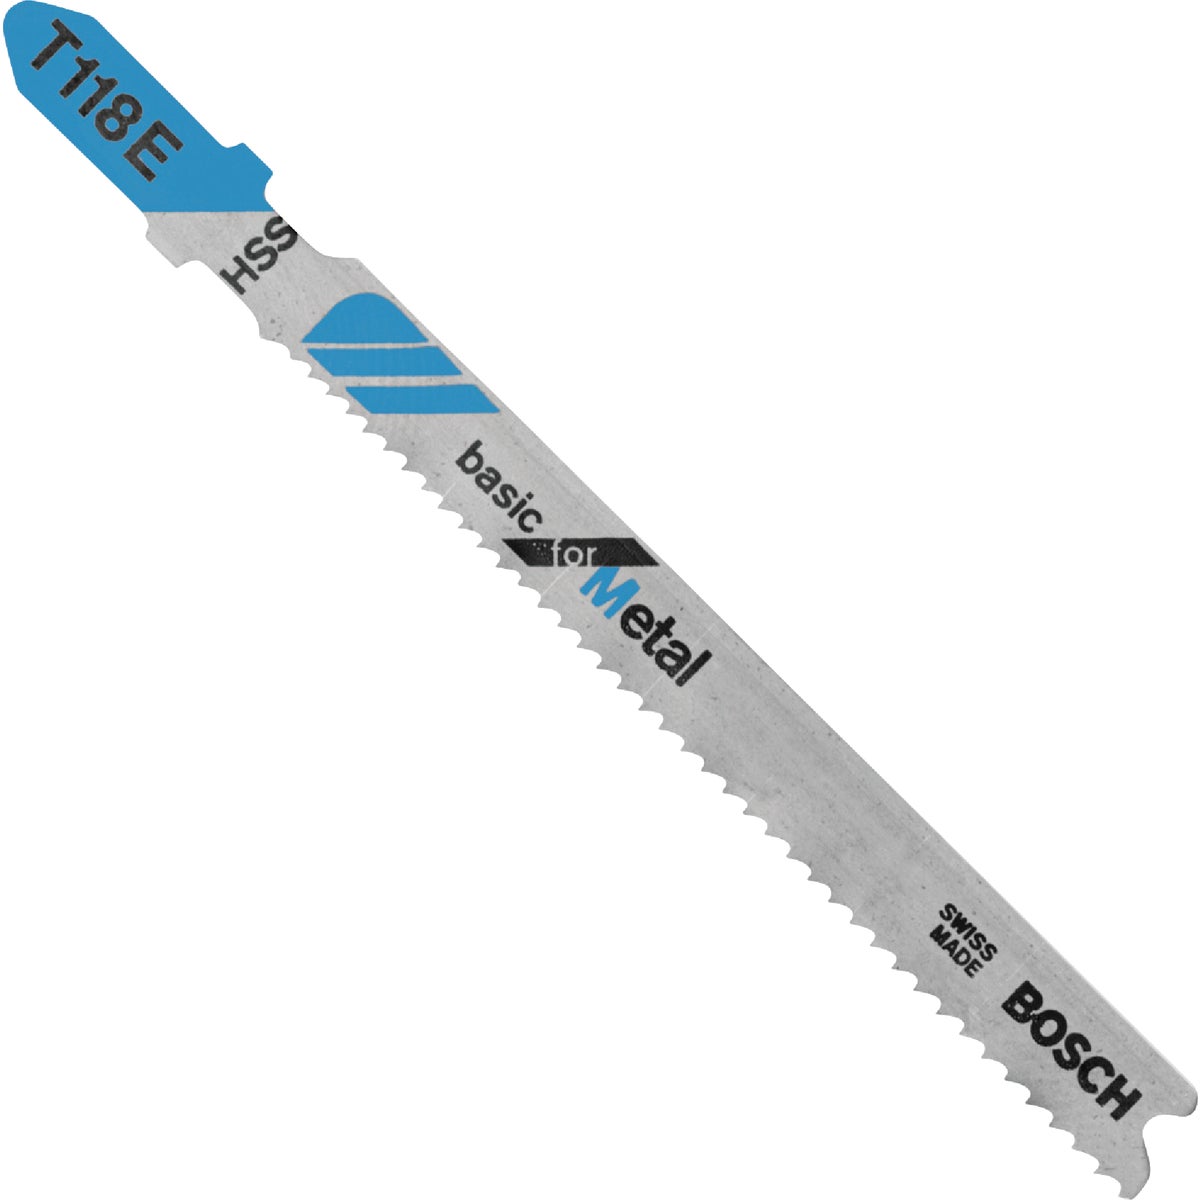 Item 335002, T-shank design for maximum grip and stability which fits 90% of all current